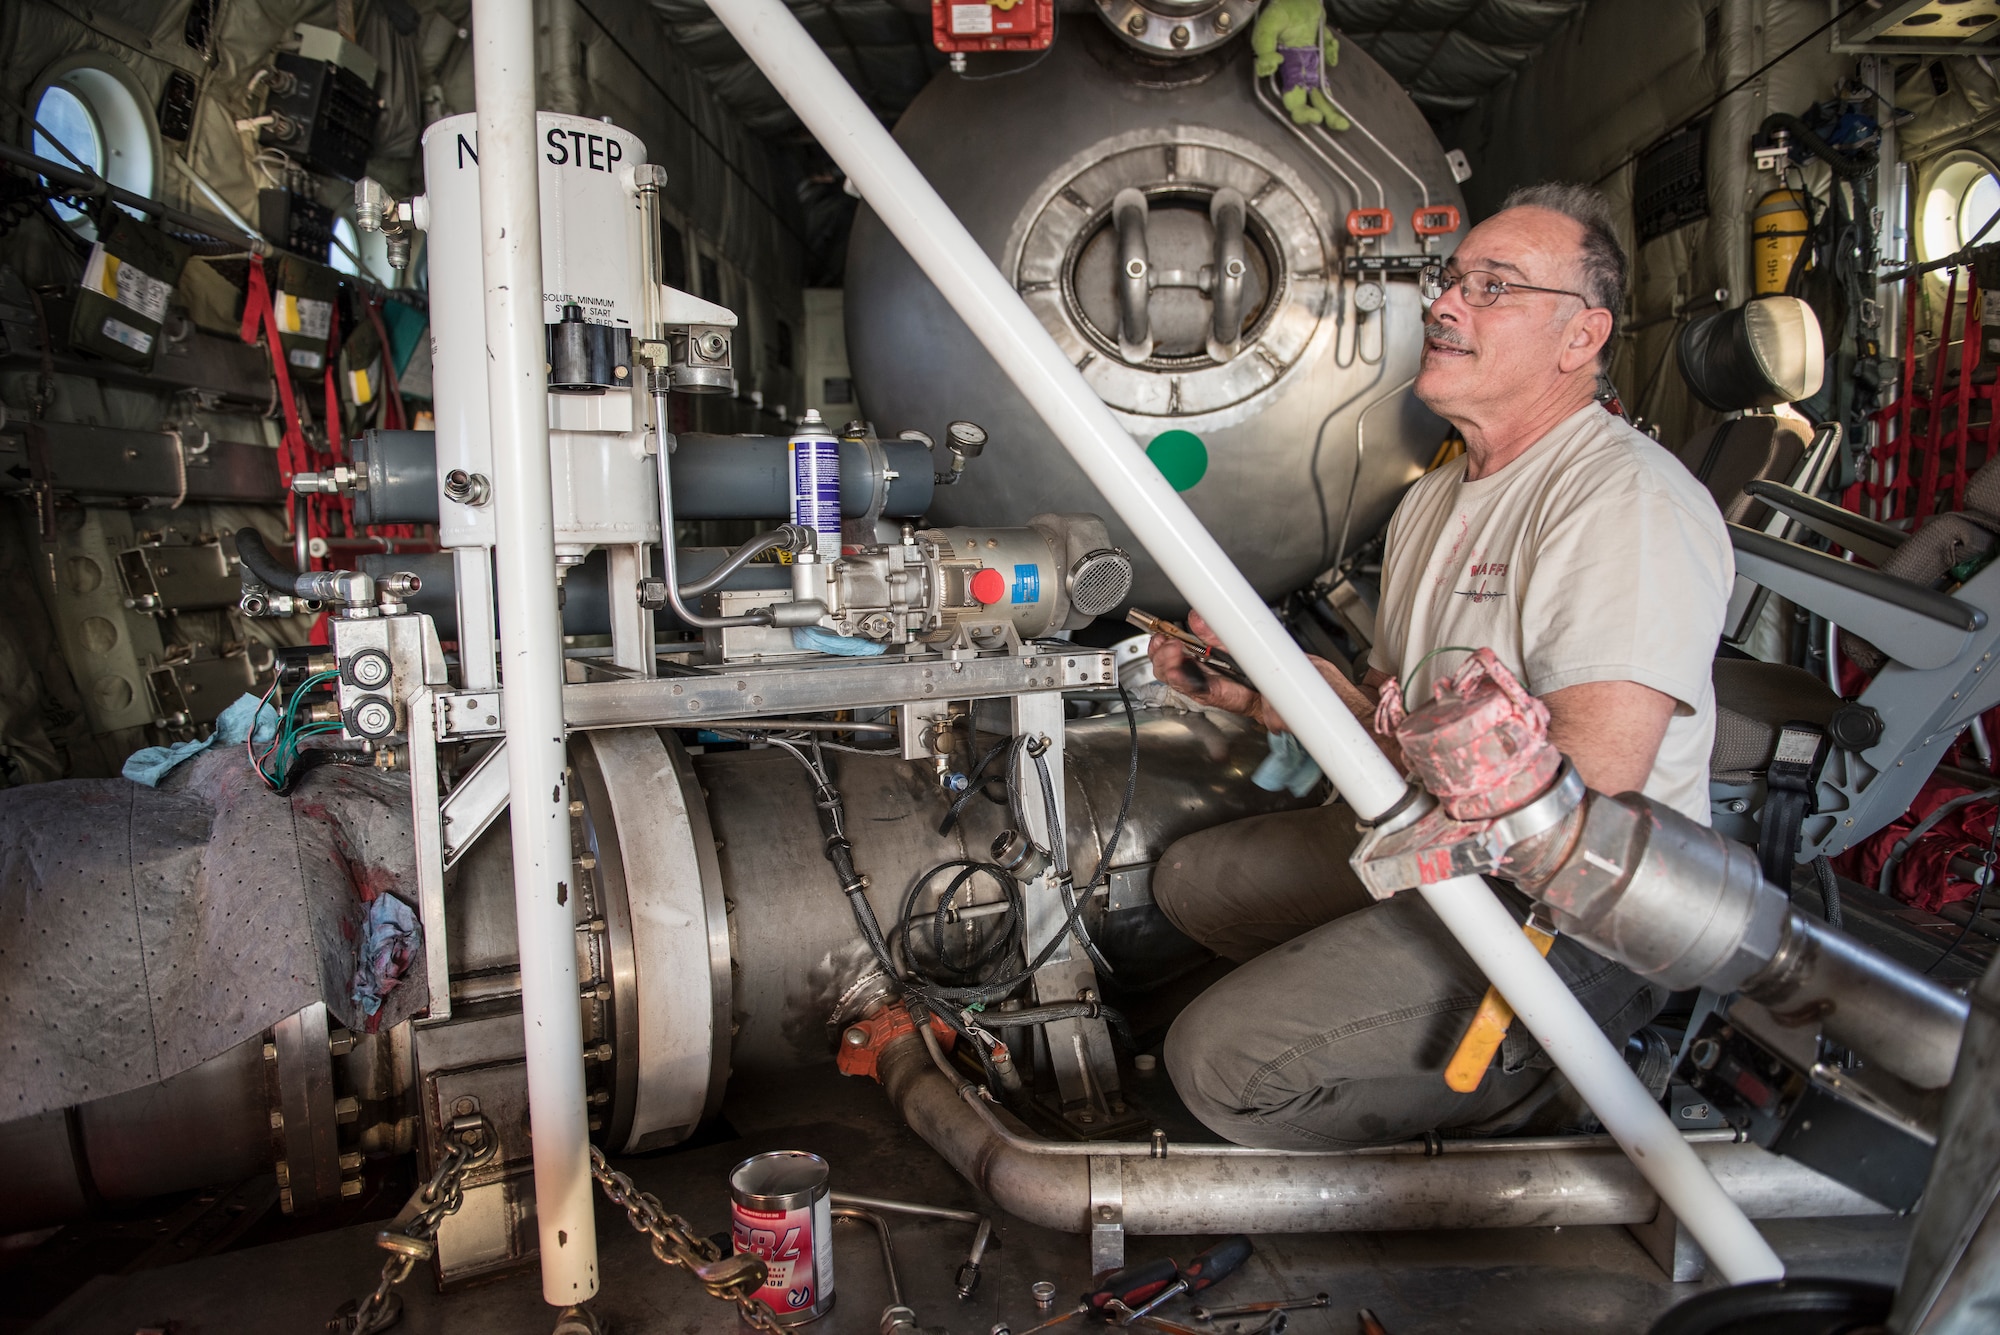 A technicians perform repairs on a Modular Airborne Fire Fighting System (MAFFS) in the cargo bay of a C-130J of the 146th Airlift Wing at Channel Islands Air National Guard Base in Port Hueneme, California, Dec. 9, 2017. The MAFFS units, which are owned by the U.S. Forestry Service, can be loaded and made ready for operations in about three hours. A mixture of water and fire-retardant chemicals is deployed through a nozzle attached to an orange door the replaces the paratroop door on the C-130J.(U.S. Air Force photo)